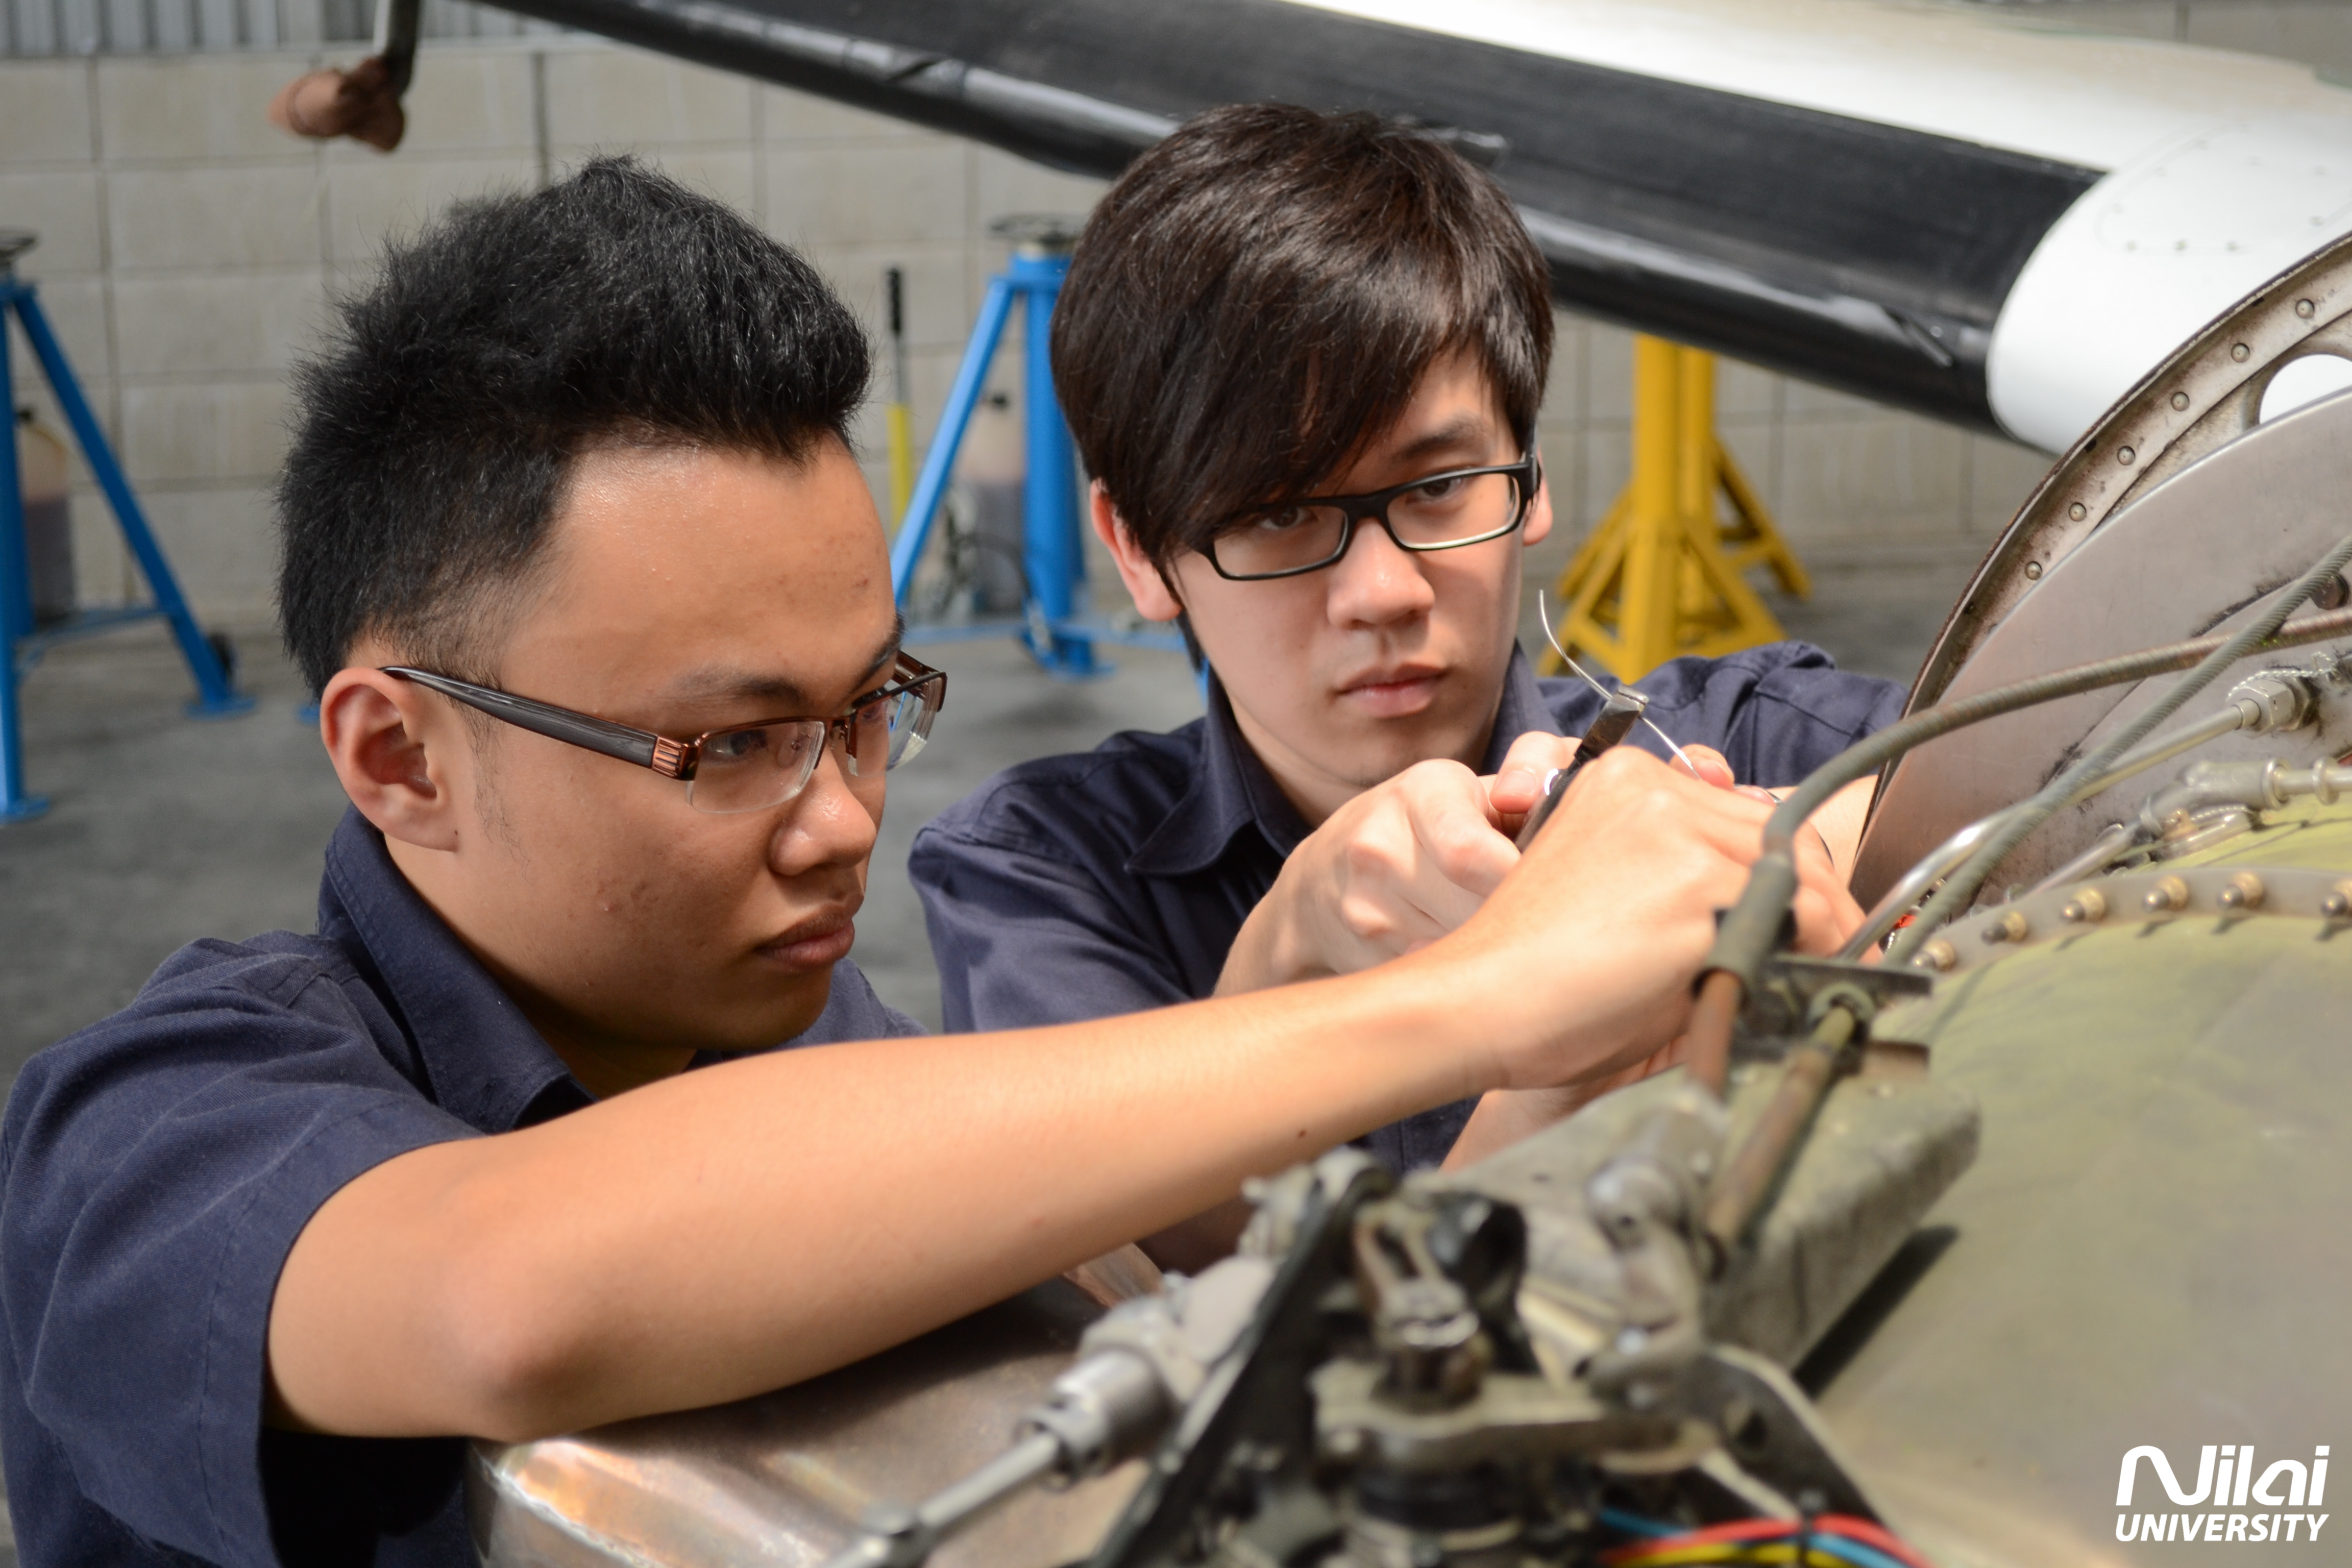 The field of aircraft maintenance provides a high income compared to being a car mechanic.